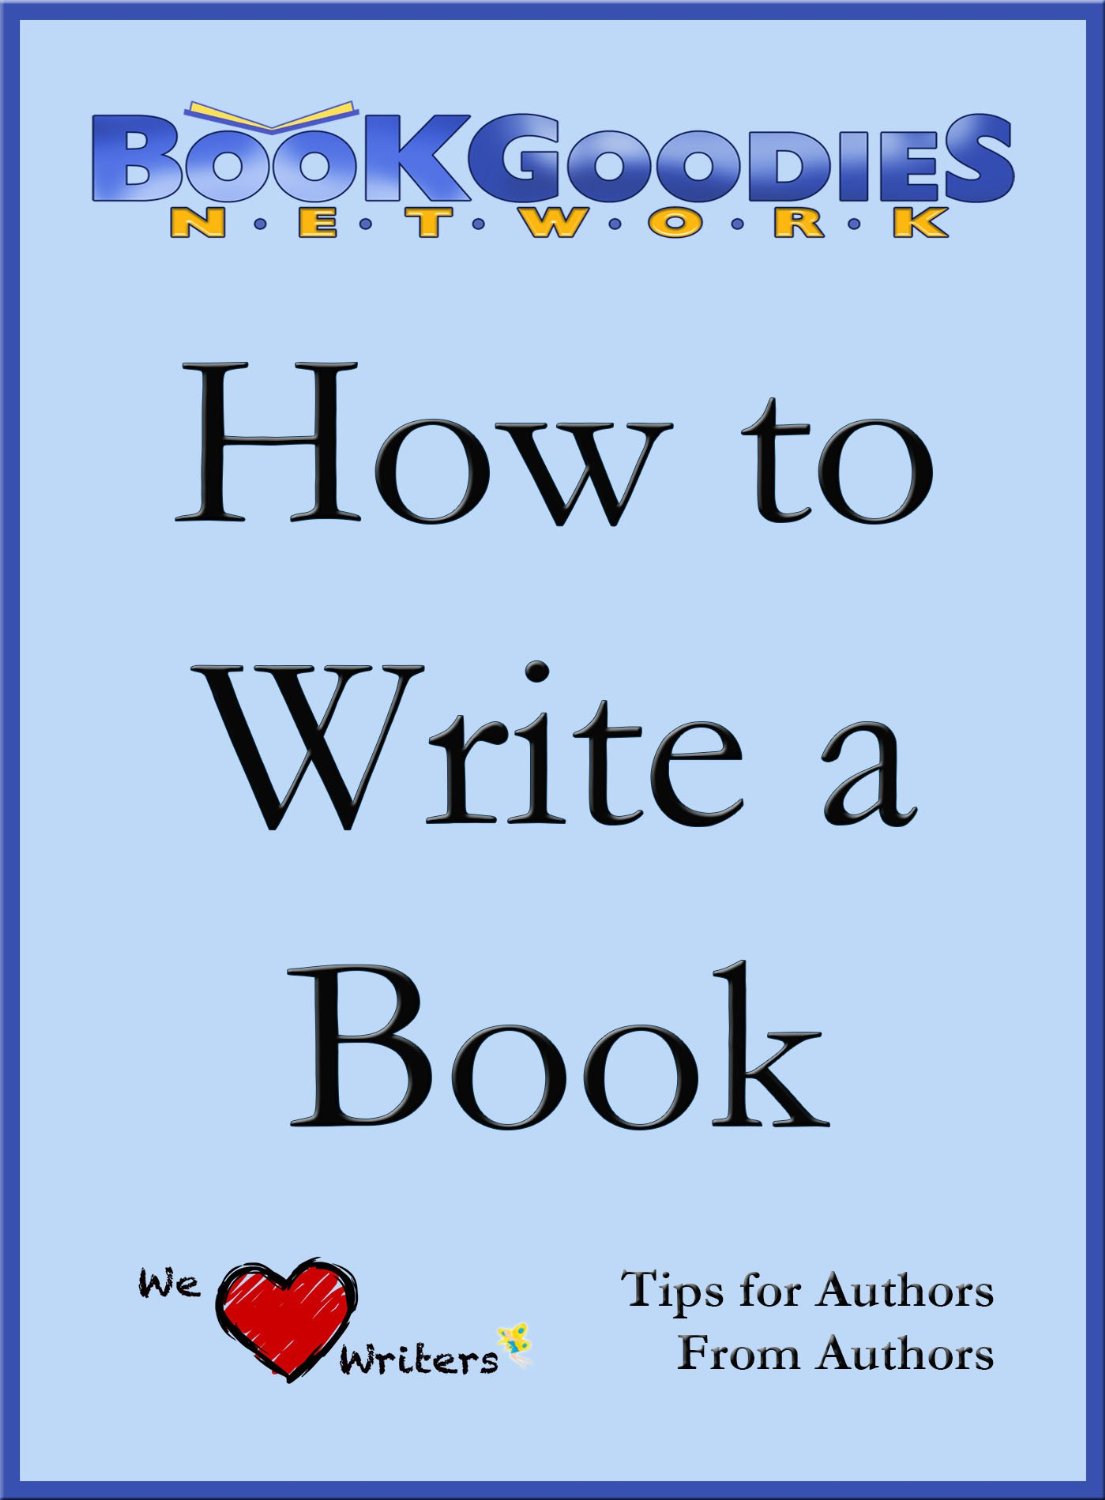 How To Write A Book: Tips from Authors for Authors About Writing and Publishing by Deborah Carney